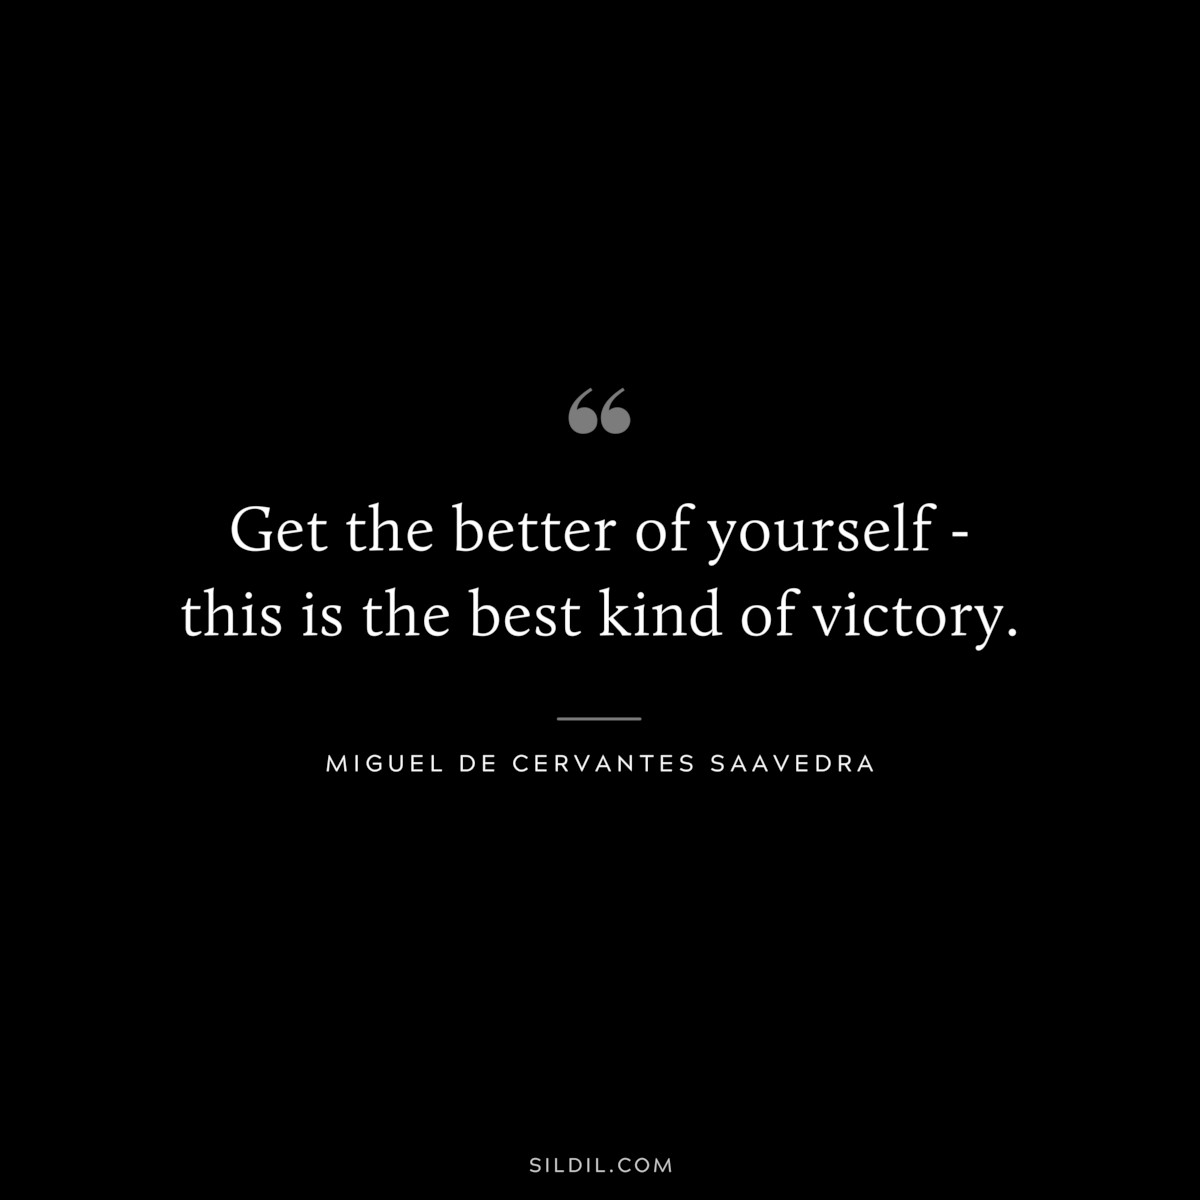 Get the better of yourself - this is the best kind of victory. ― Miguel de Cervantes Saavedra